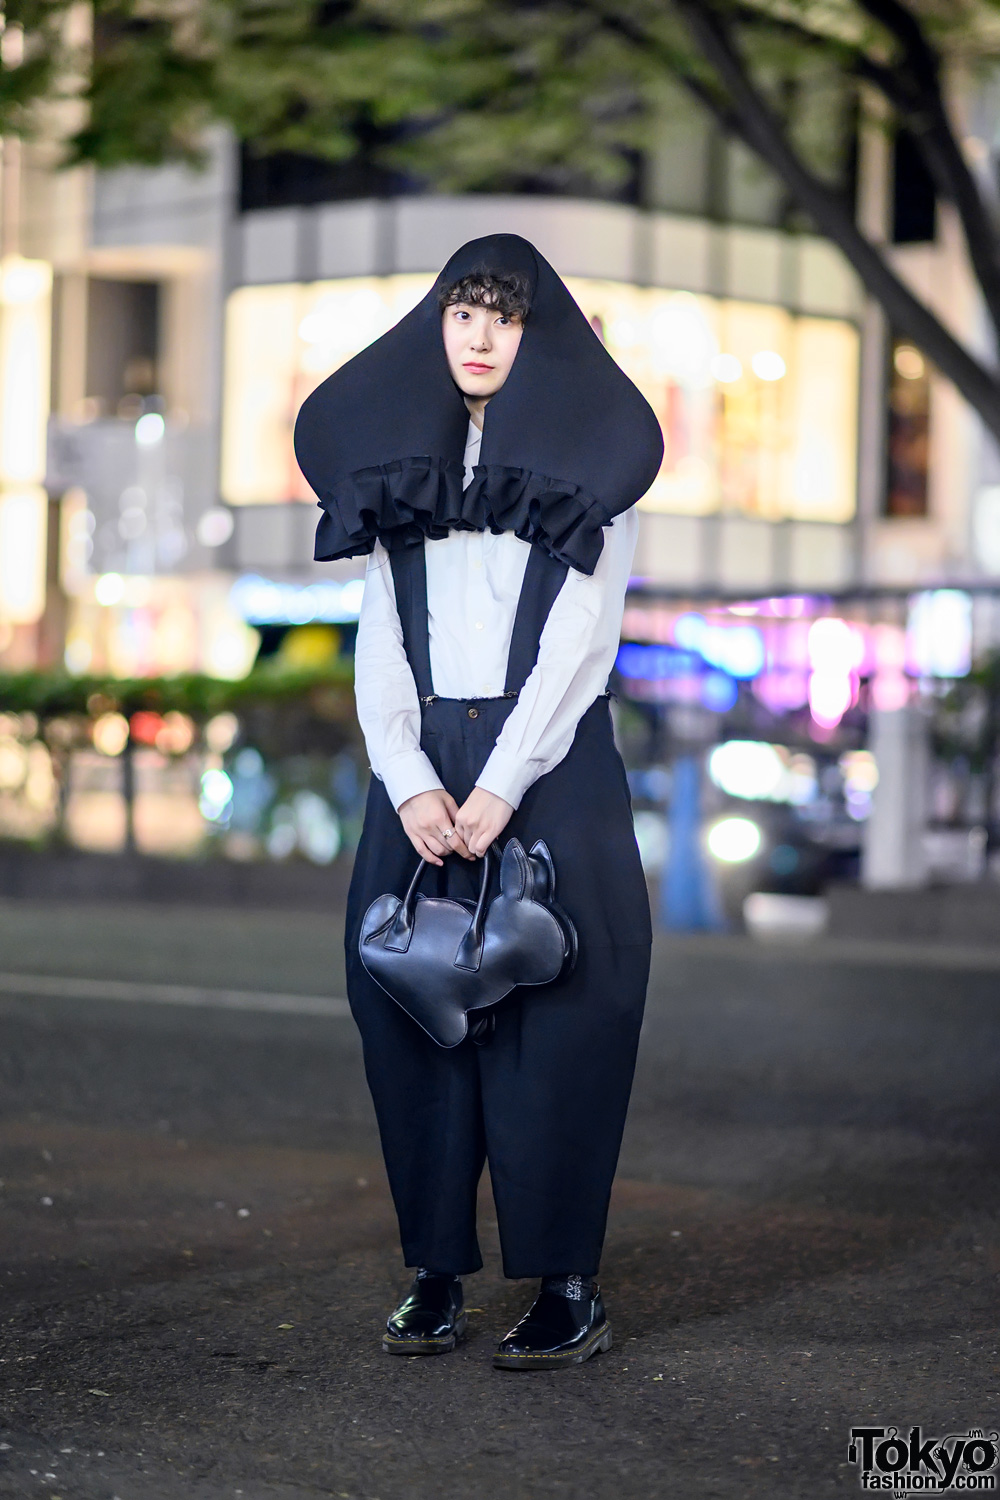 Comme Des Garcons Japanese Street Style in Harajuku w/ Headpiece, Rabbit Bag, Balloon Pants & CDG x Dr. Martens